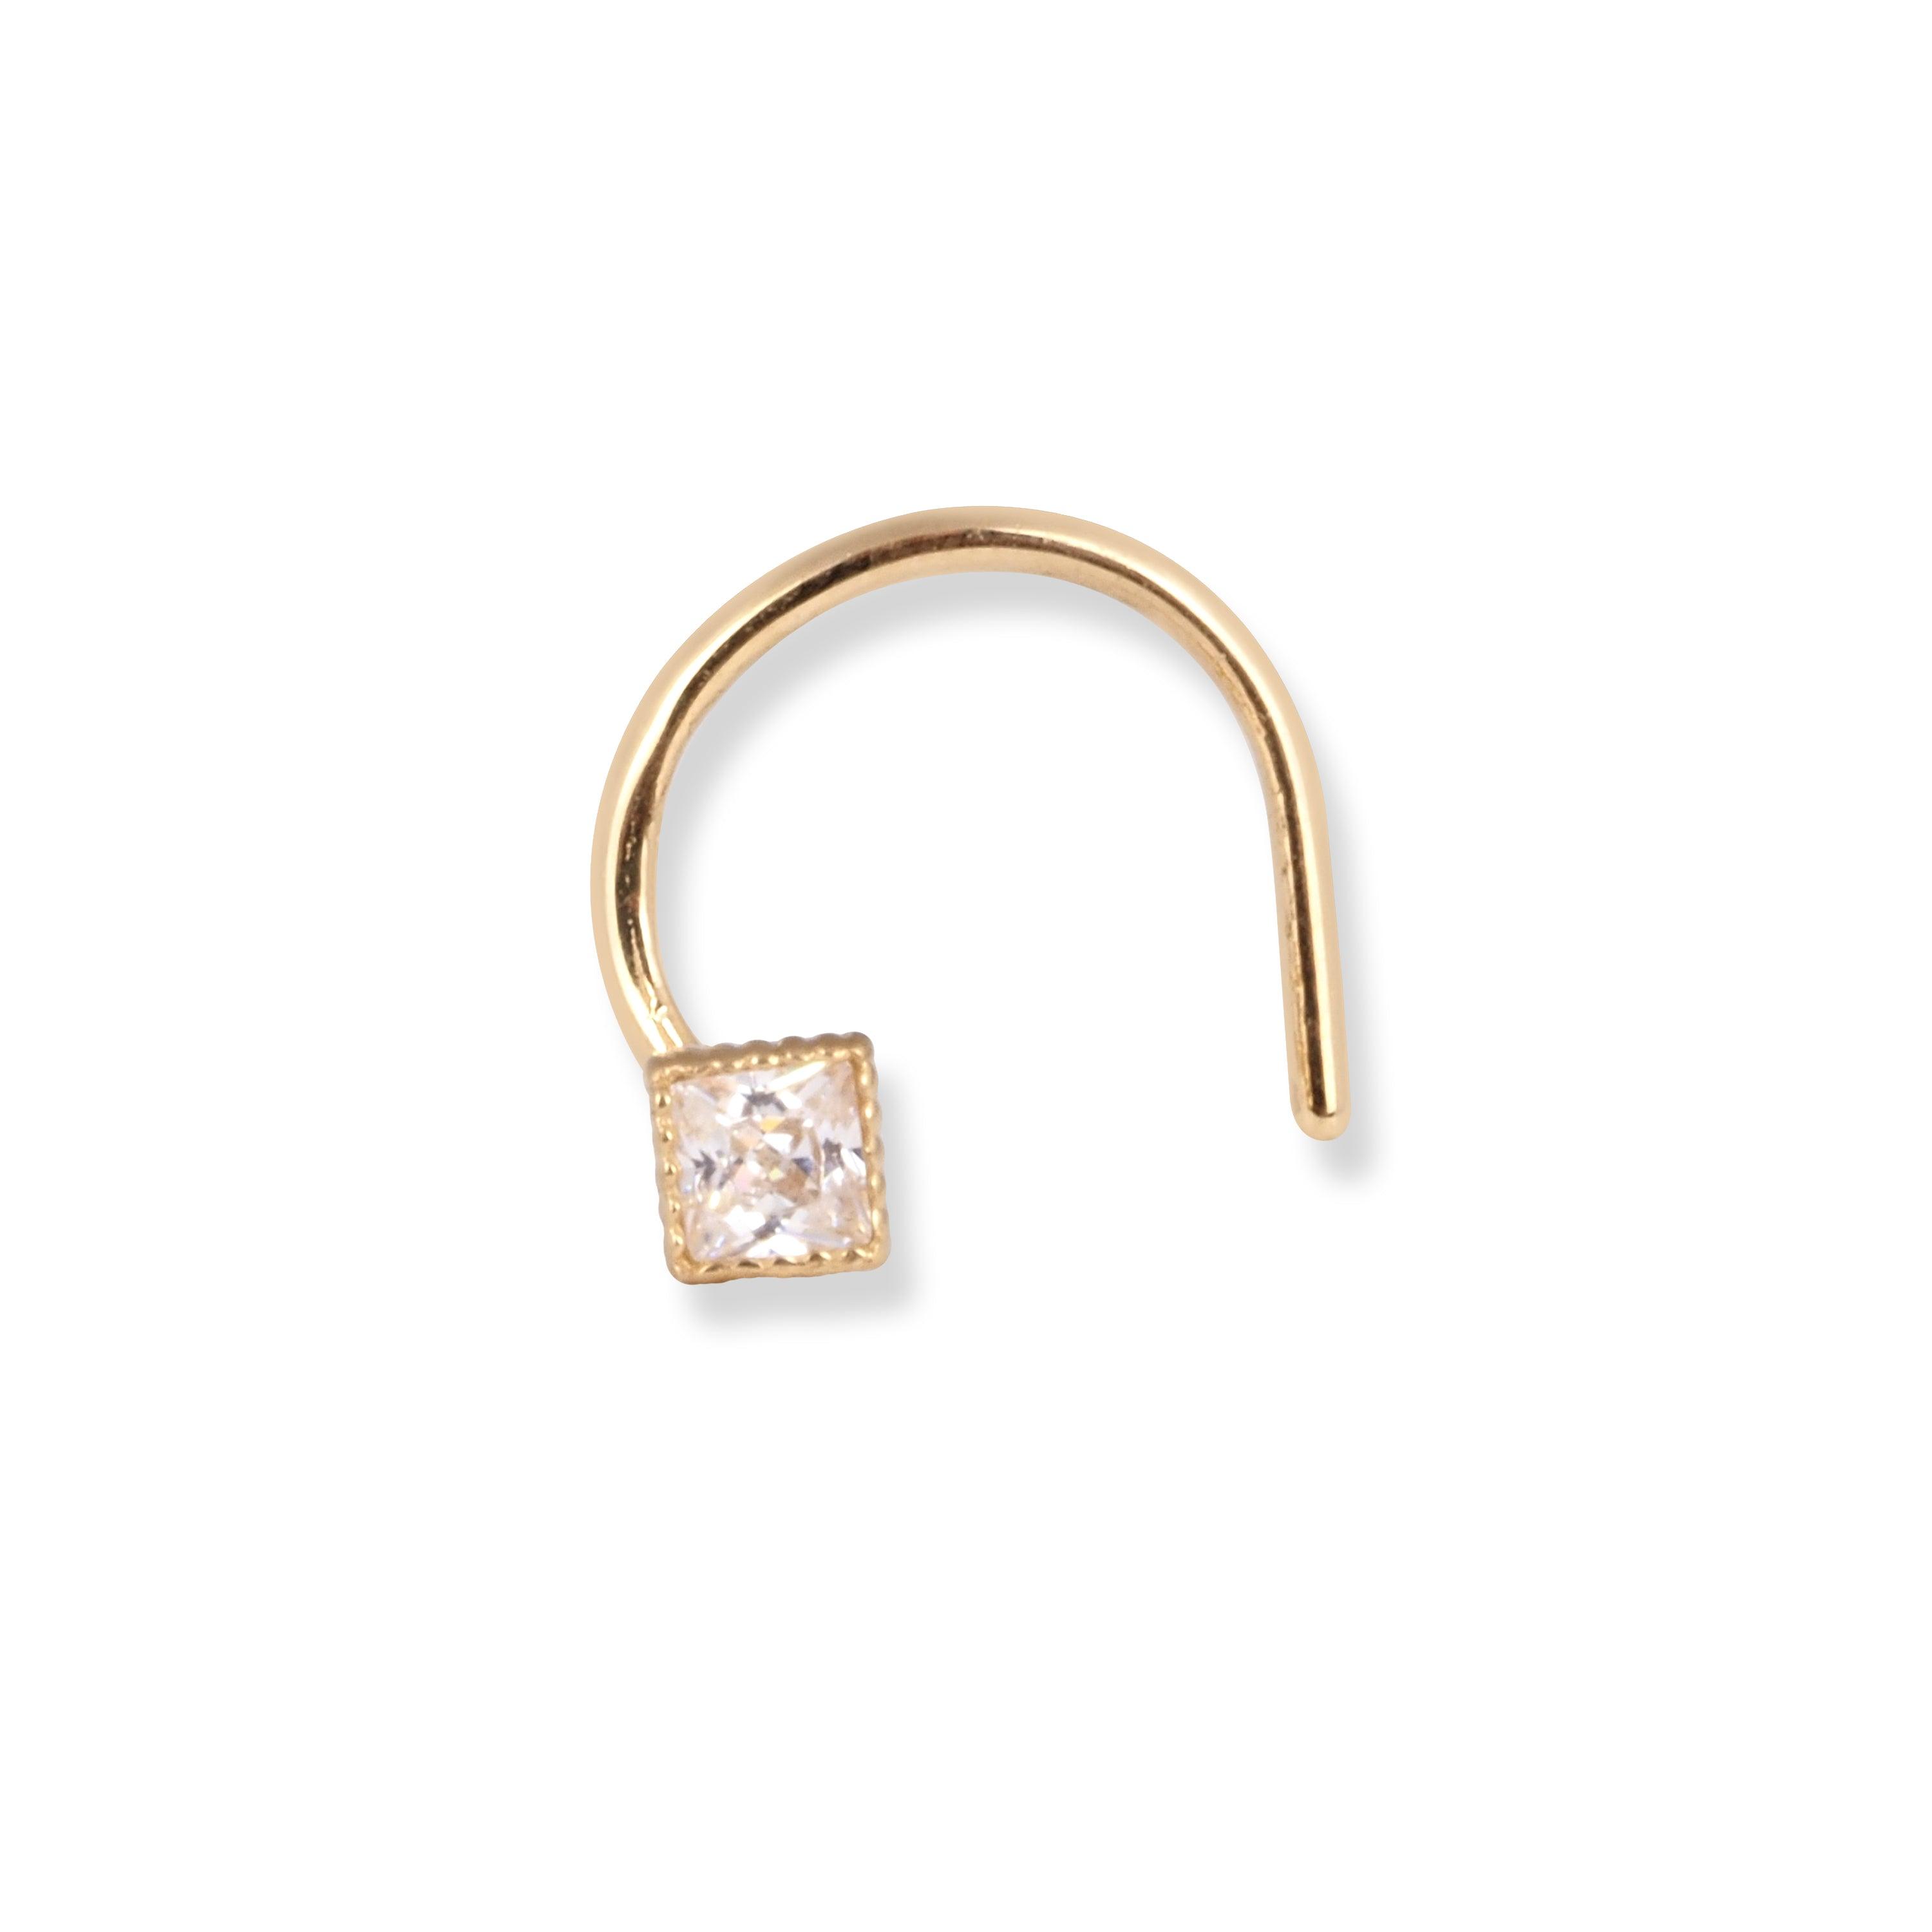 18ct Yellow Gold Wire Back Nose Stud with Princess Cut Cubic Zirconia Stone NS-7563 - Minar Jewellers